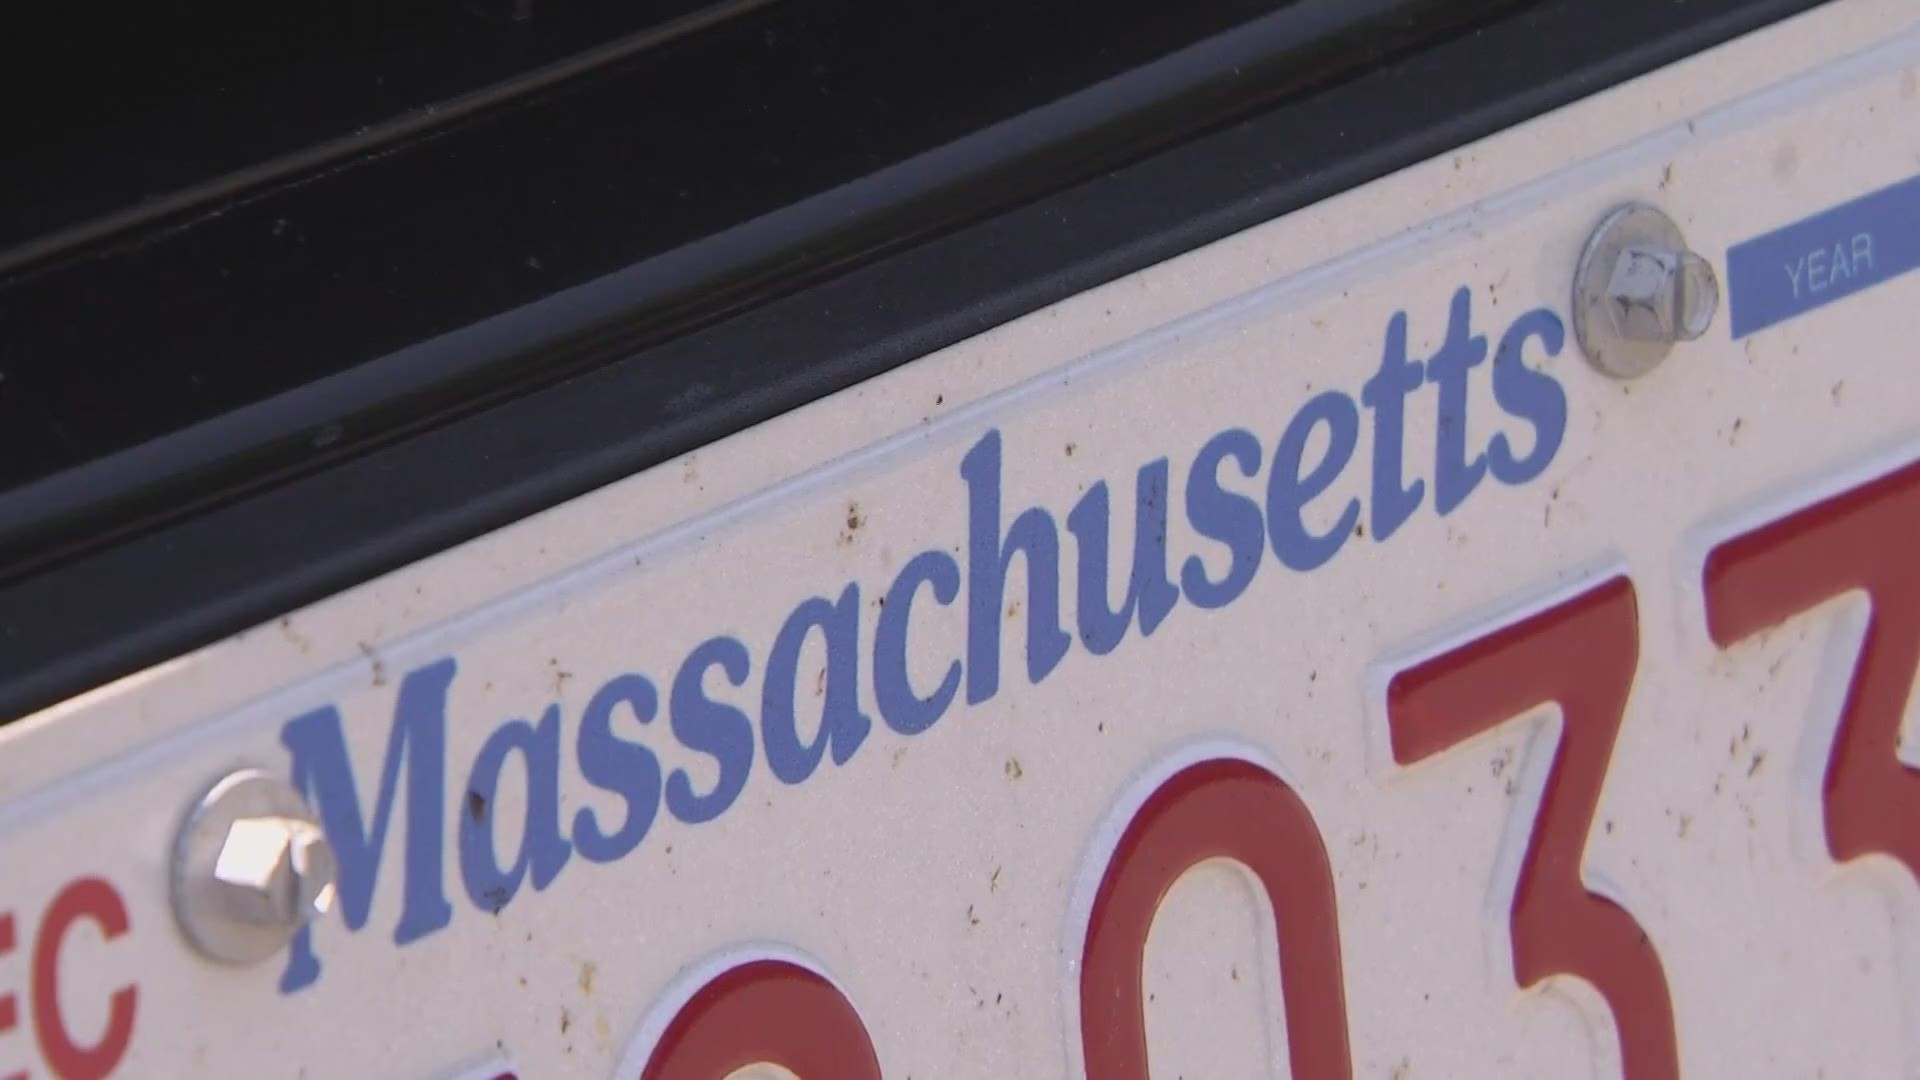 How Massachusetts residents being allowed back in Maine amid COVID-19 will impact tourism